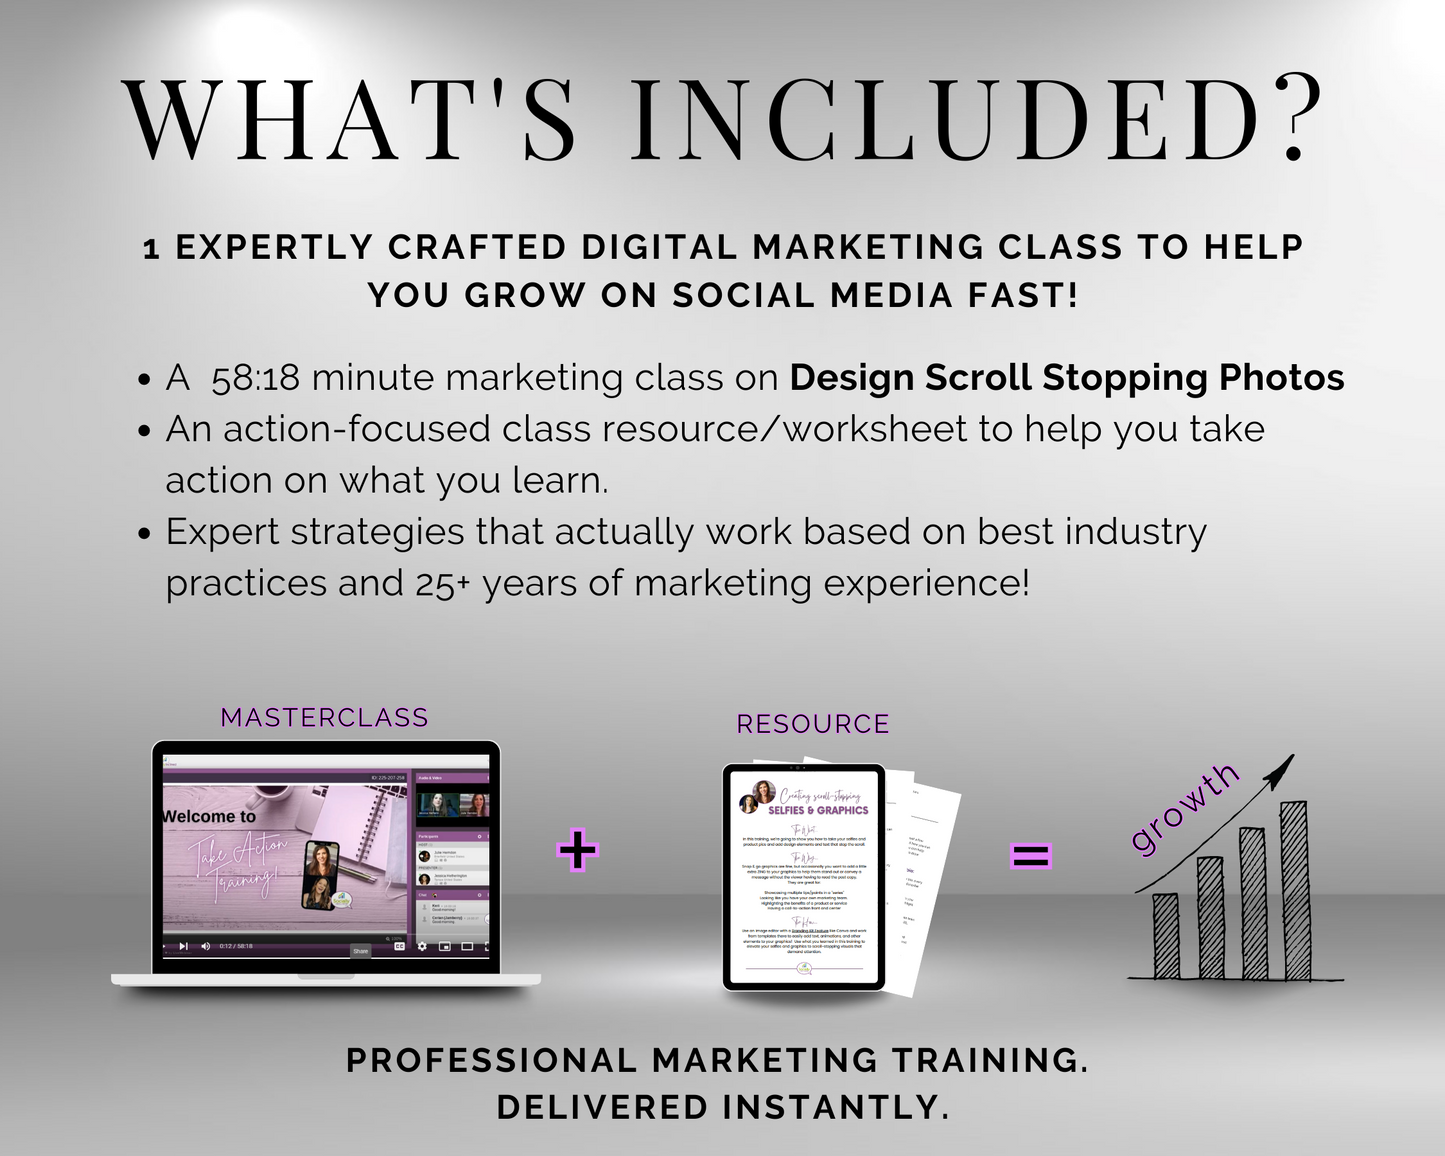 What's included in the TAT - Design Scroll Stopping Photos Masterclass by Get Socially Inclined? Get a comprehensive overview of key concepts and strategies in digital marketing, including social media marketing, search engine optimization (SEO), content marketing, email marketing.